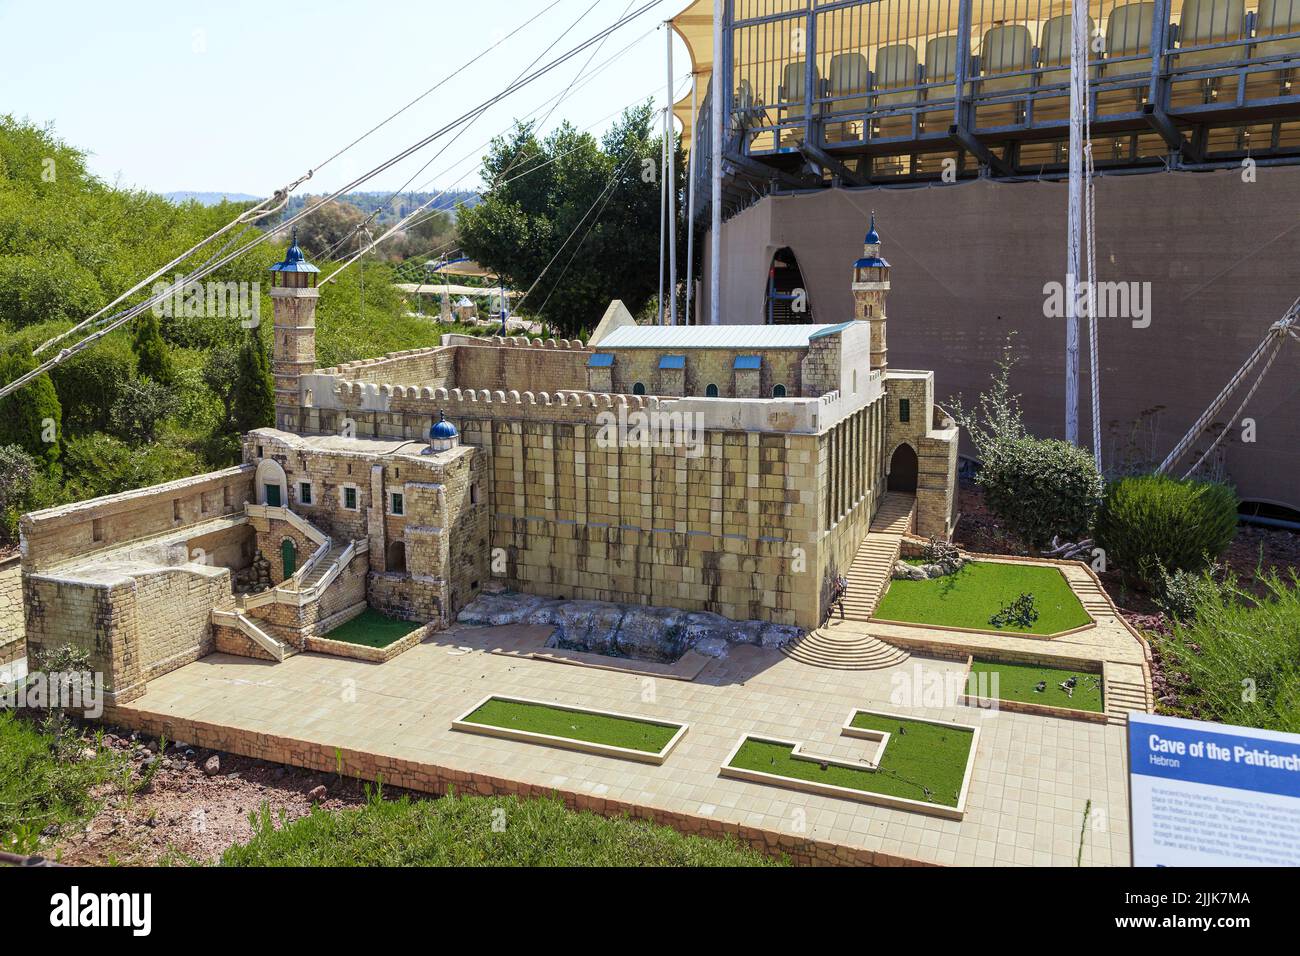 LATRUN, ISRSAEL - SEPTEMBER 18, 2017: This is the layout of the Cave of the Patriarchs in the Mini Israel miniature park. Stock Photo